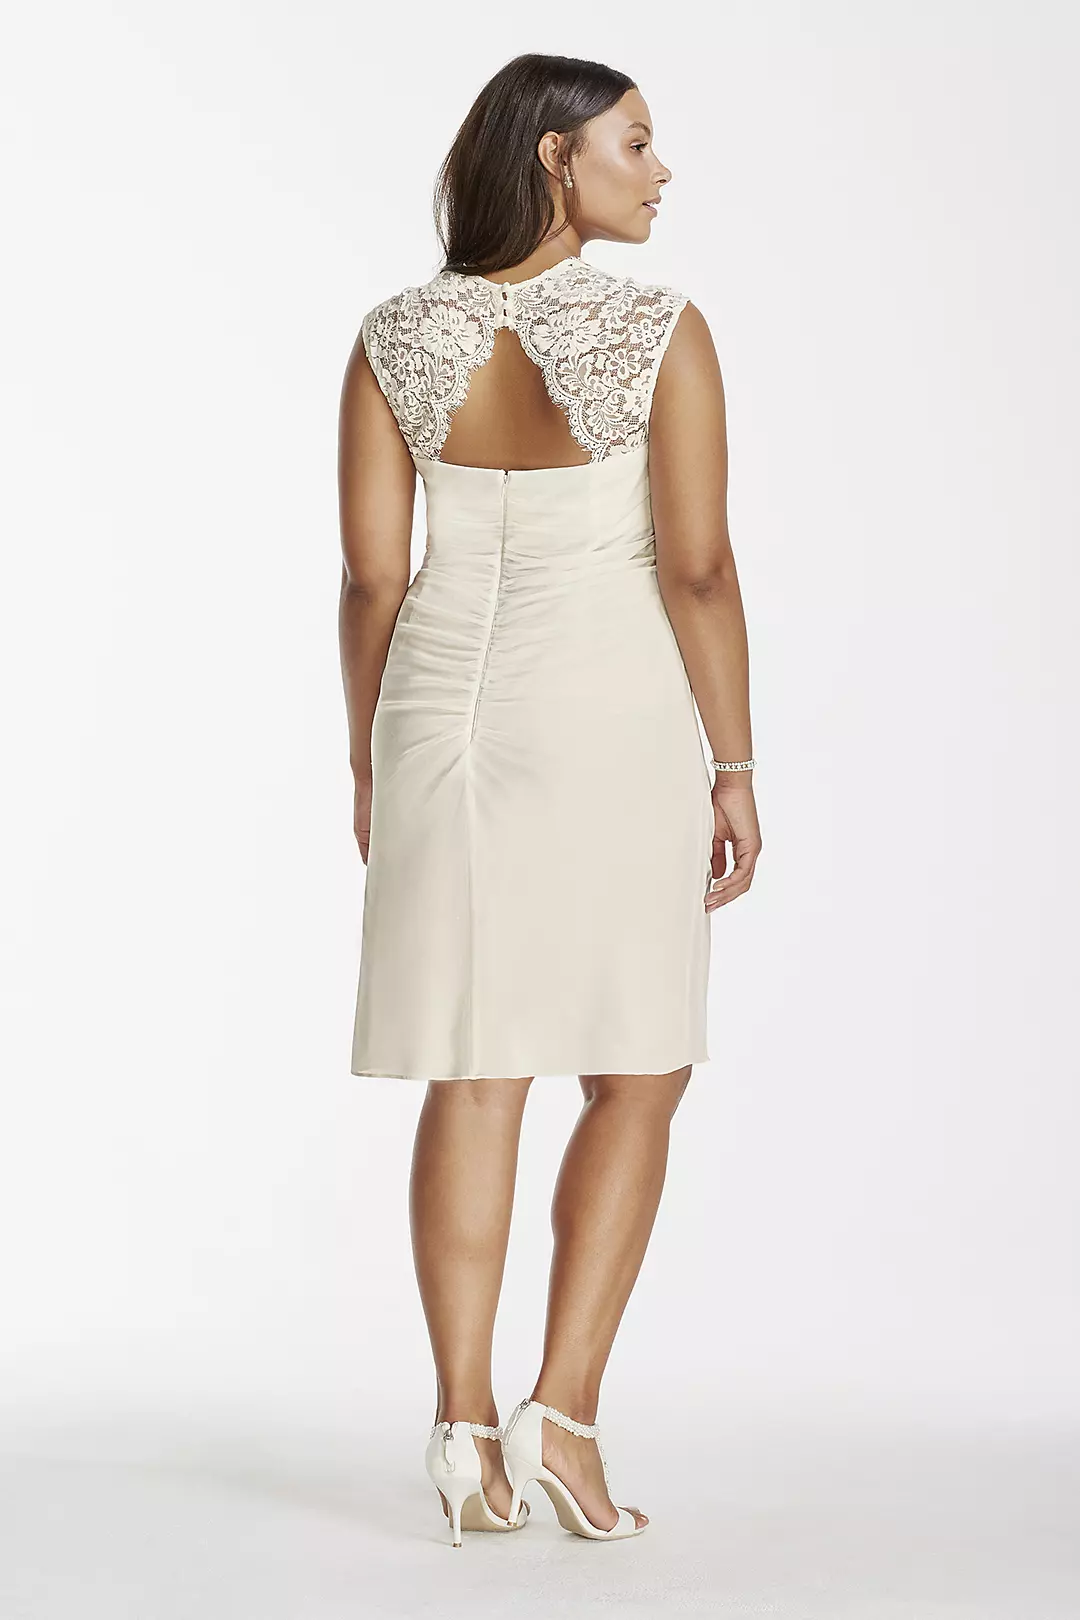 Short Mesh Wedding Dress with Lace Cap Sleeves Image 2